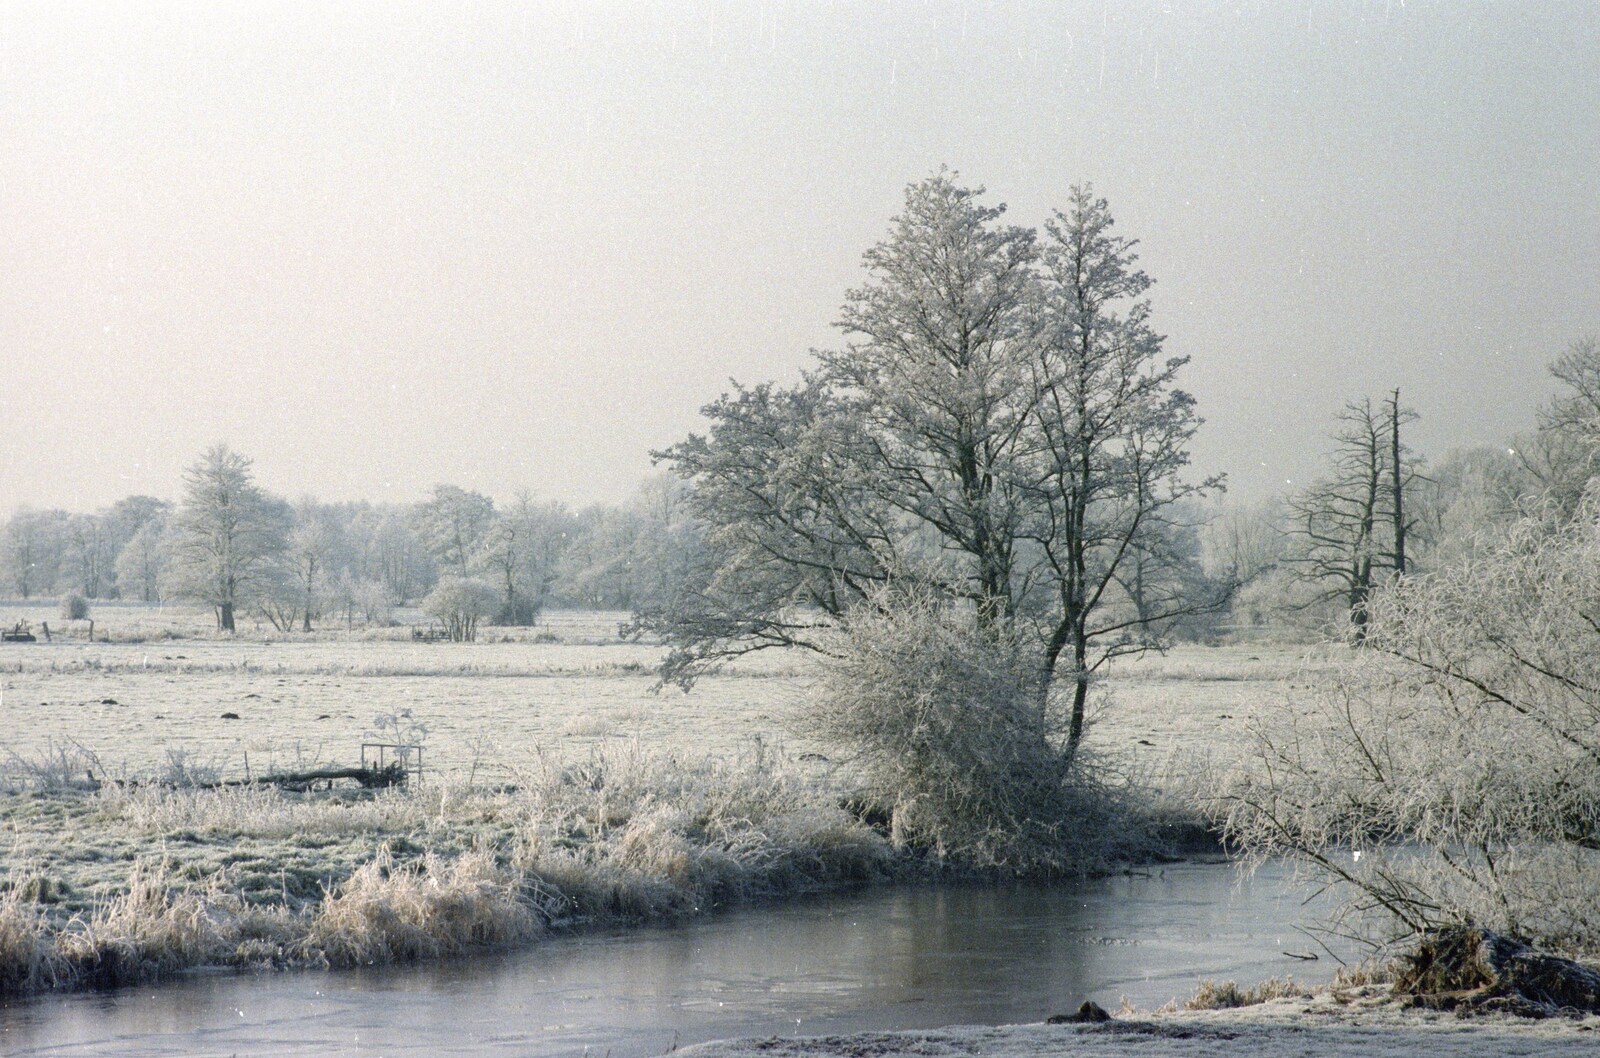 The River Waveney at Needham from A Frosty Morning, Suffolk and Norfolk - 15th December 1991